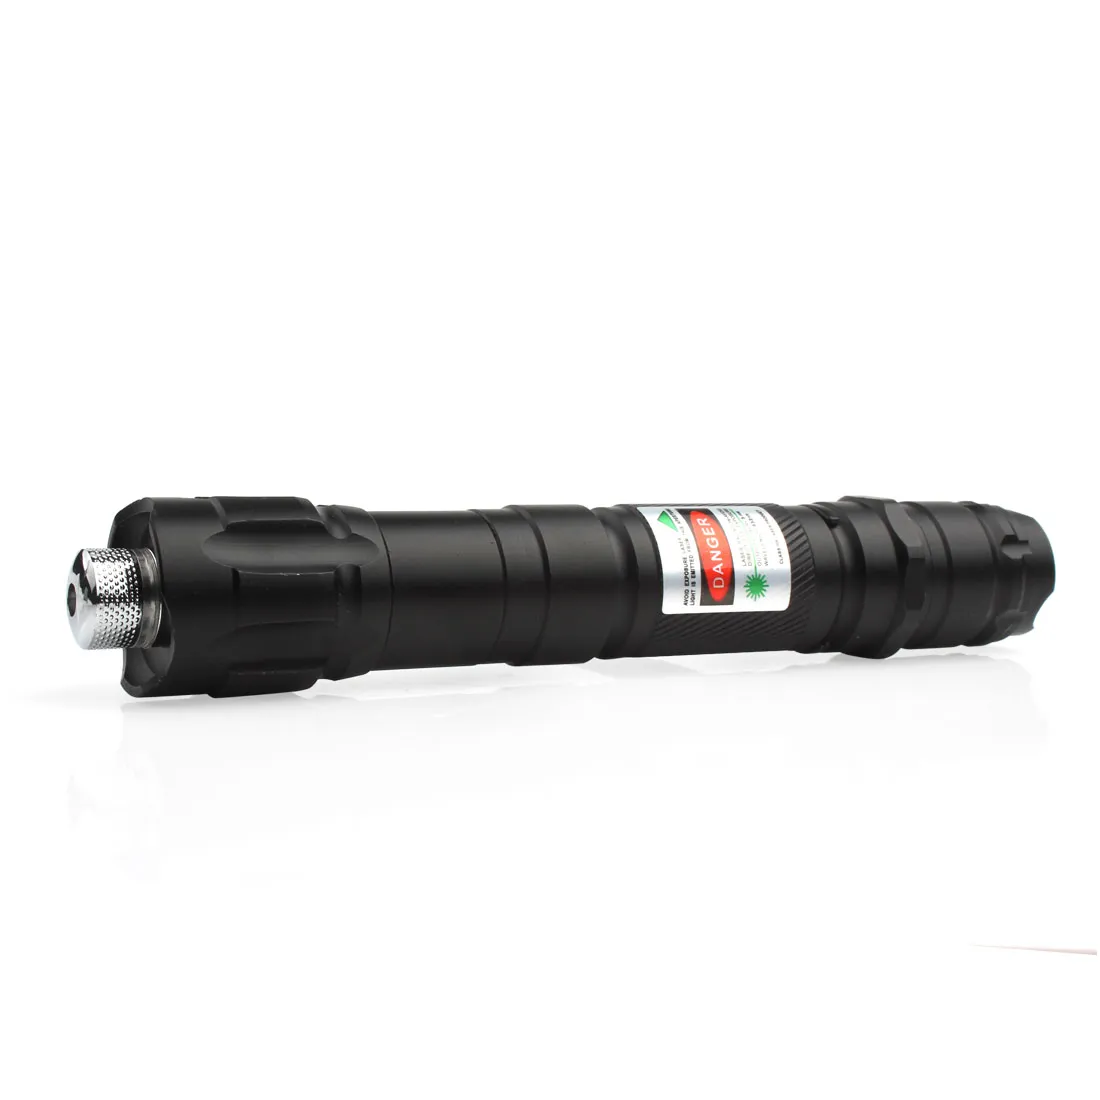 High Power 532Nm Tactical Laser Grade Green Pointer Strong Pen Lasers Lazer Pleoard Lampe militaire Clip puissant Twinkling Star 8498660